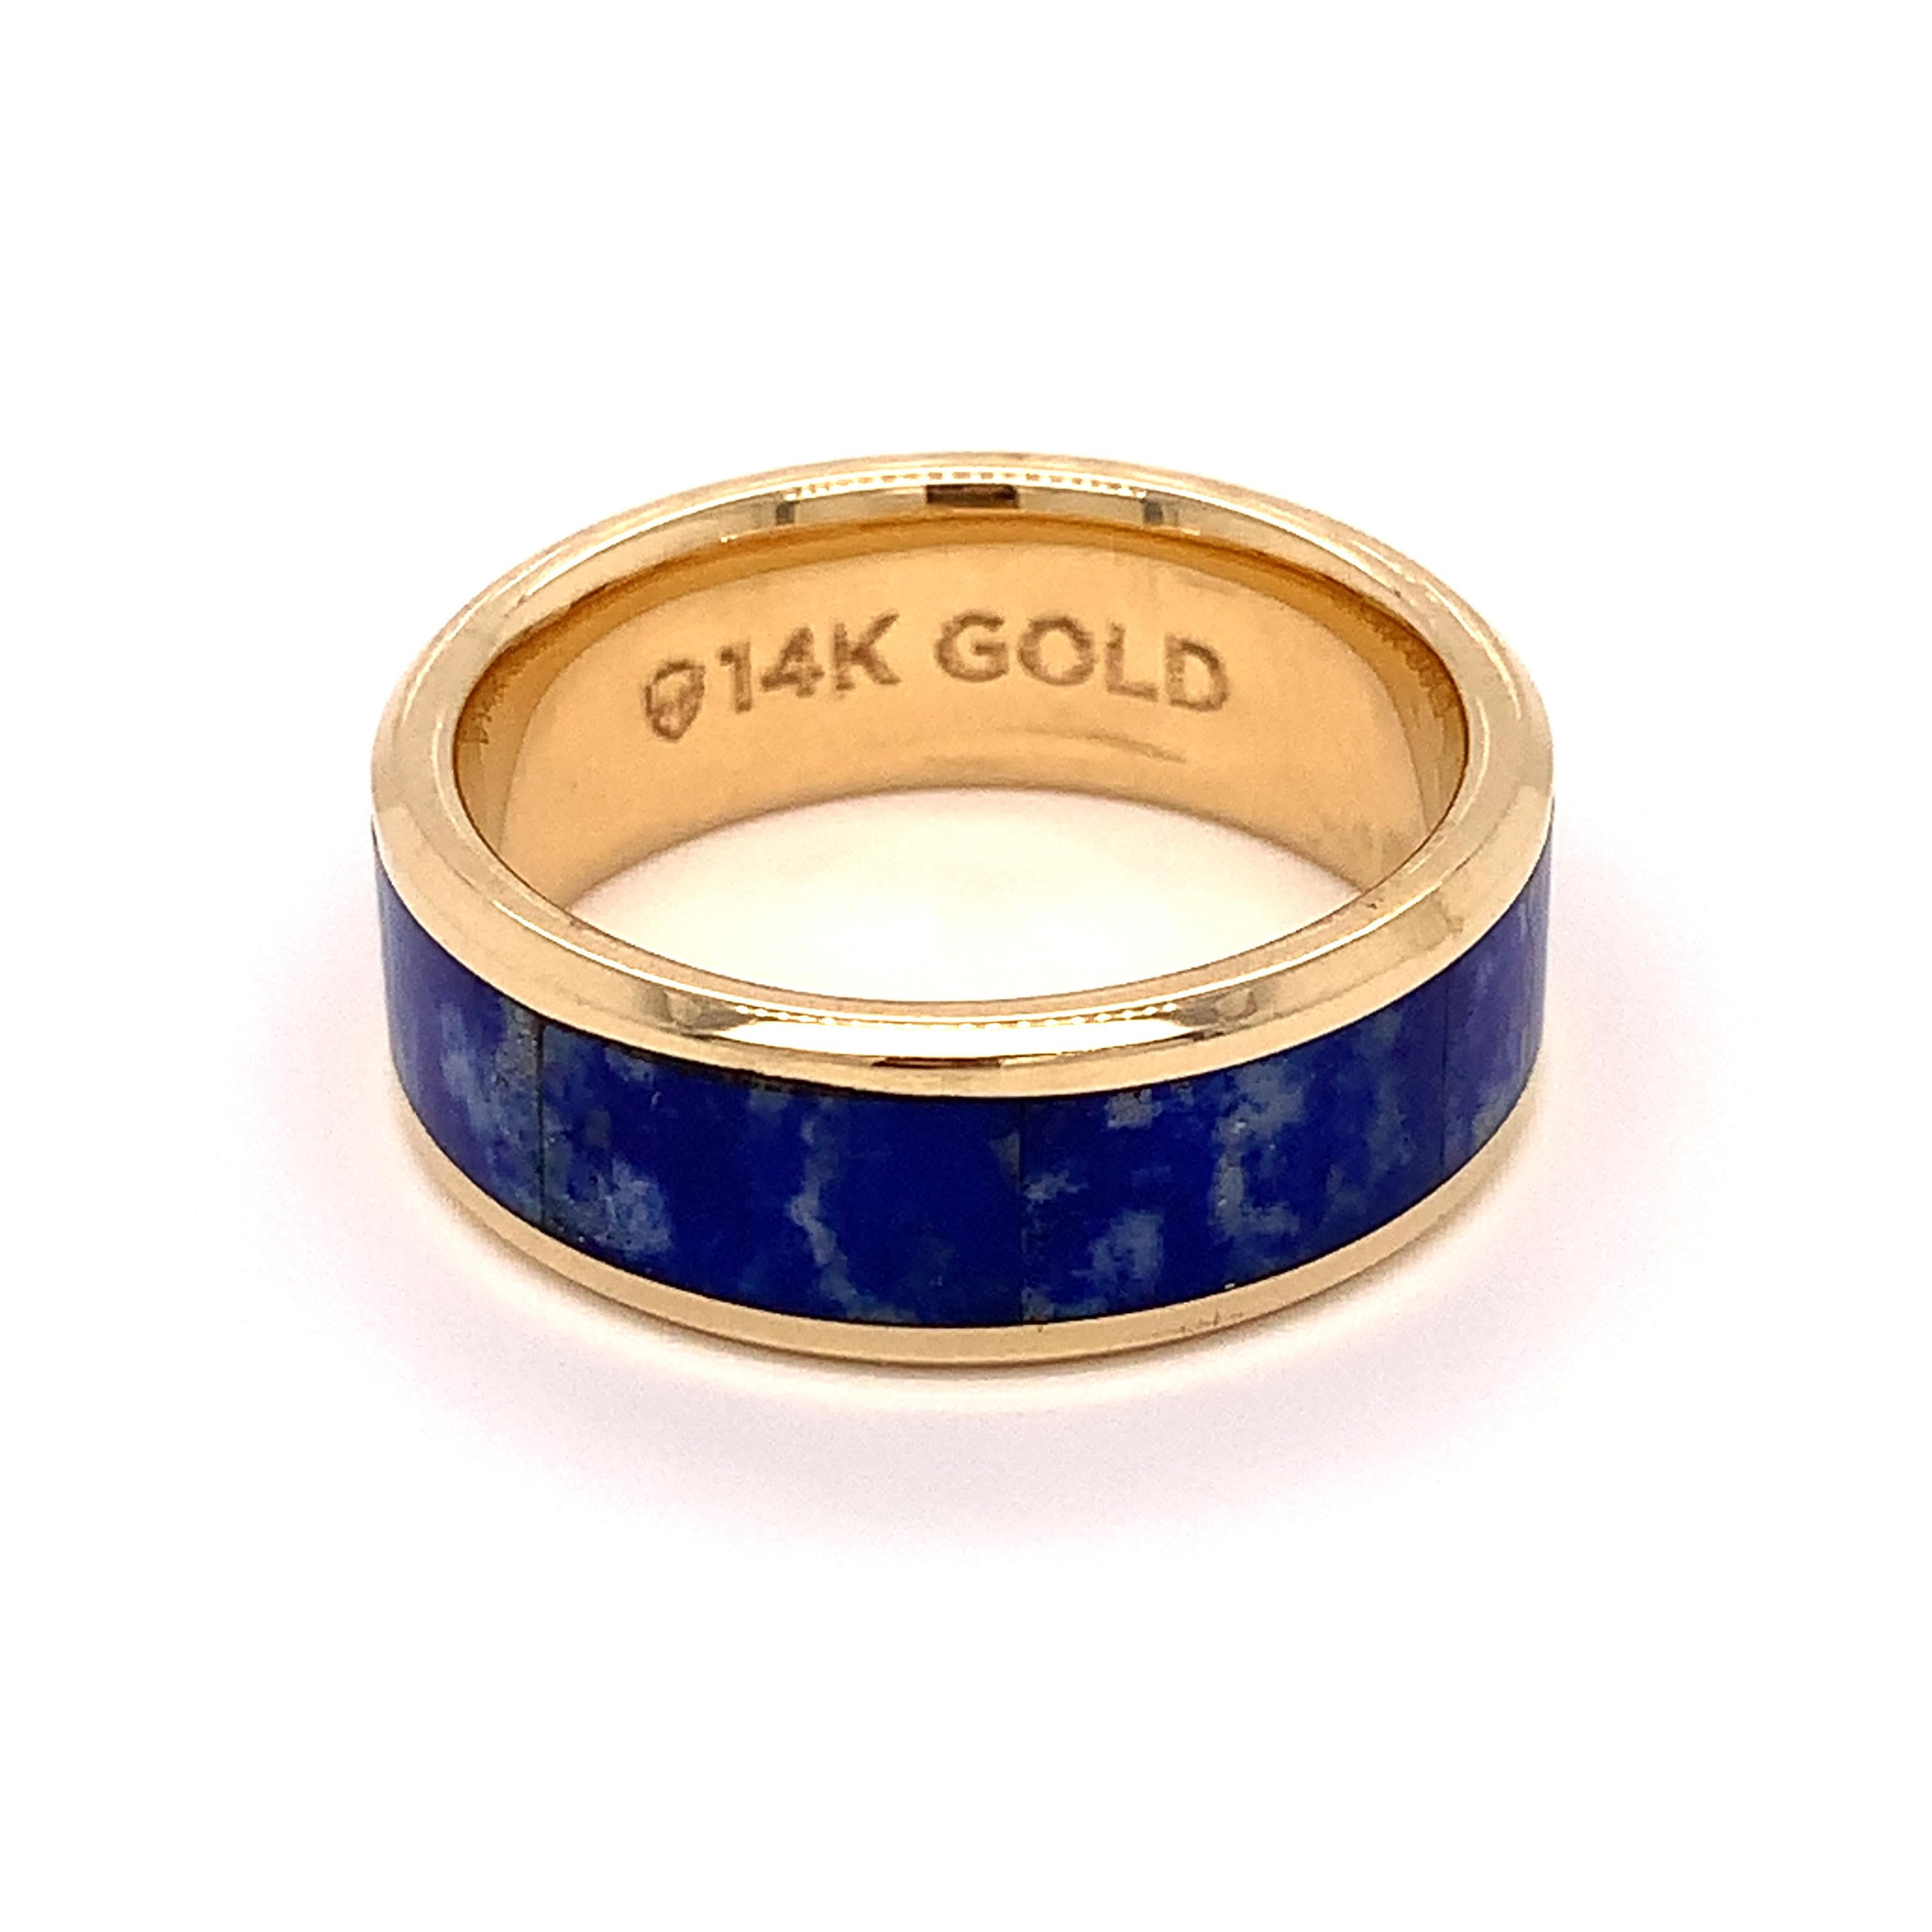 This 14K Yellow Gold men's ring by Thorsten contains a vibrant Lapis Lazuli inlay. This ring is a unique alternative to a traditional wedding band. The band is 8mm wide with polished edges for a more clean and finished look.

This is an estate piece